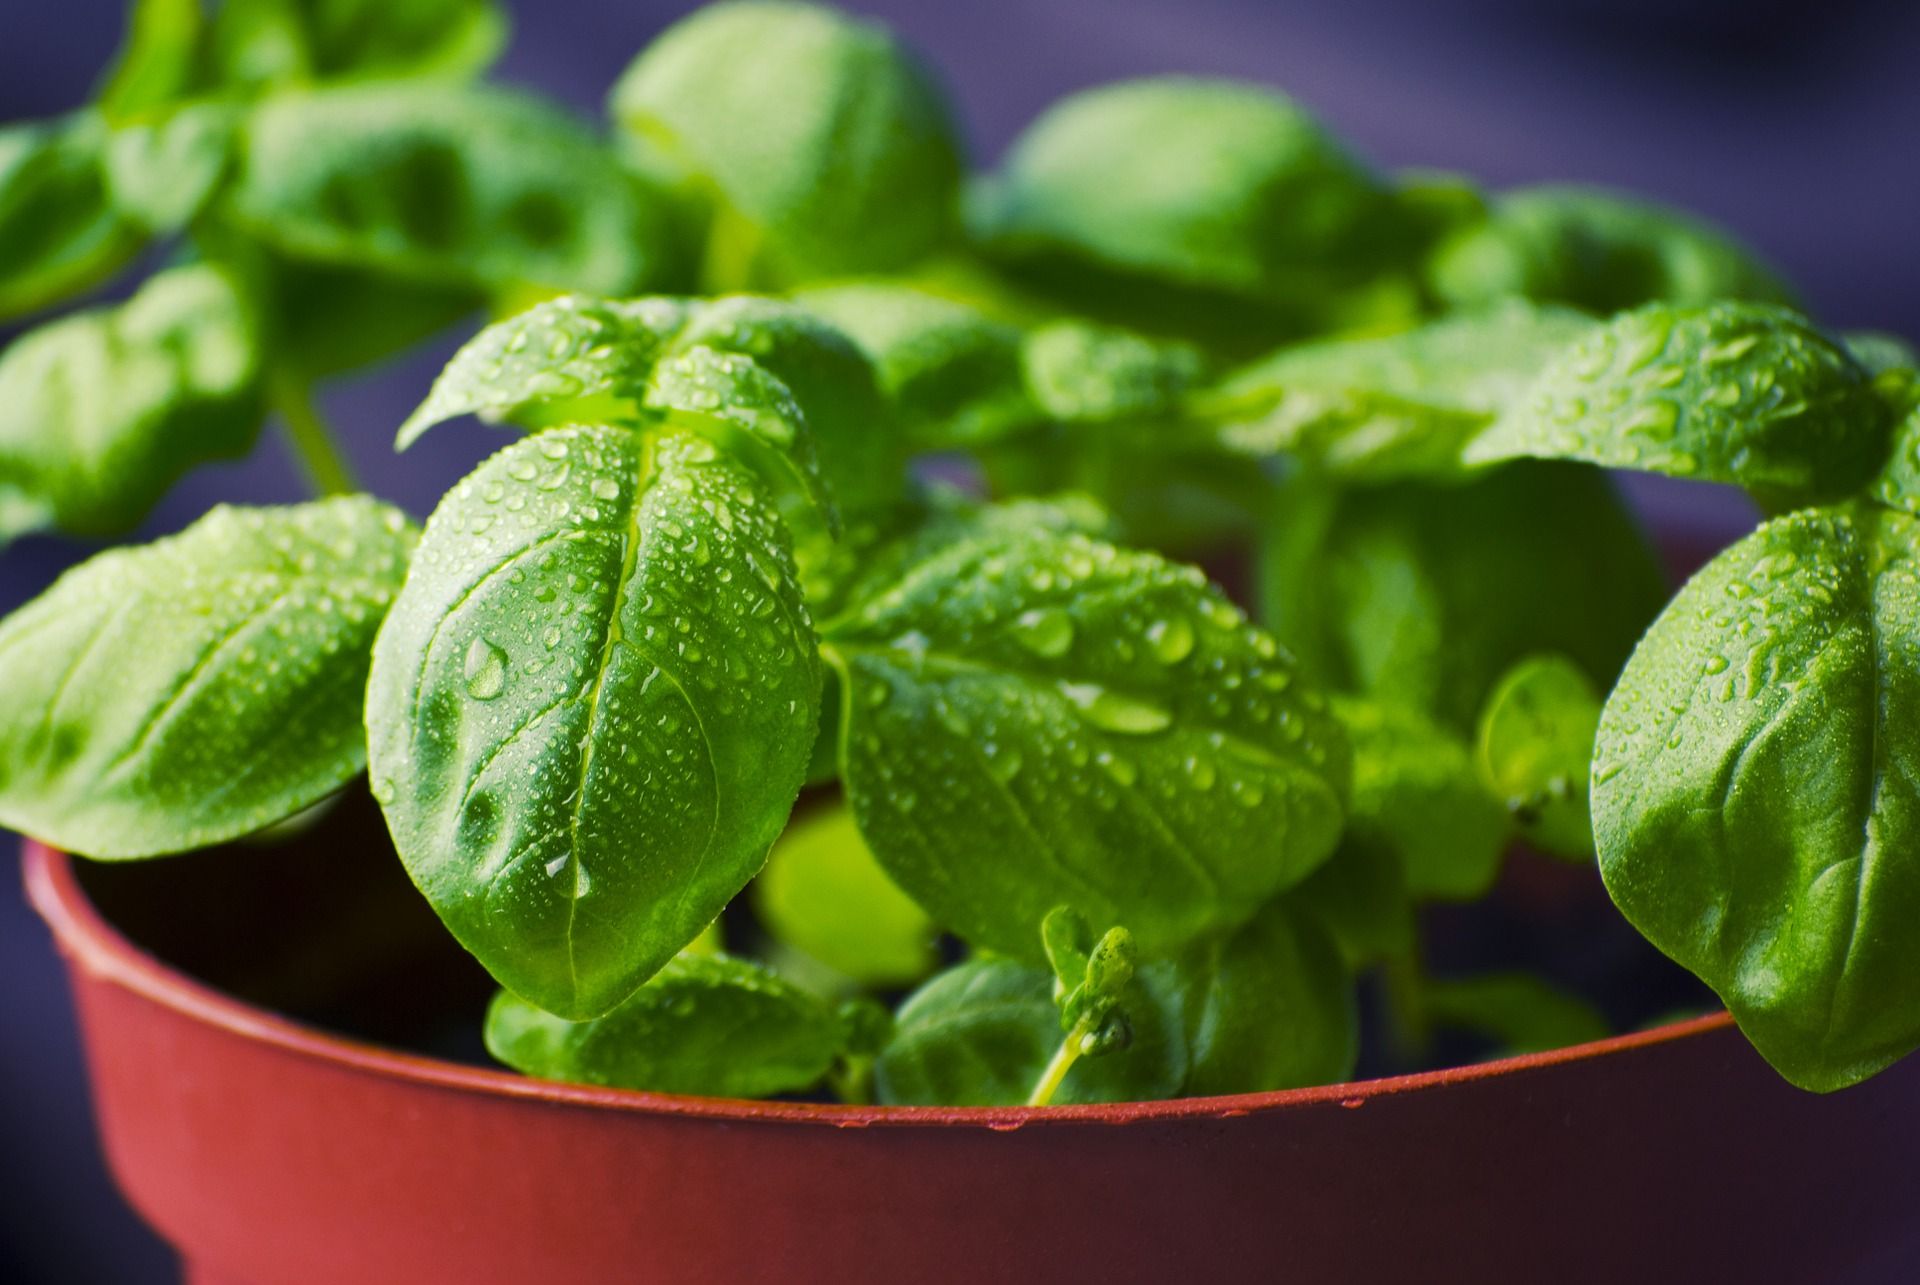 Natural compound in basil may protect against Alzheimer's disease pathology